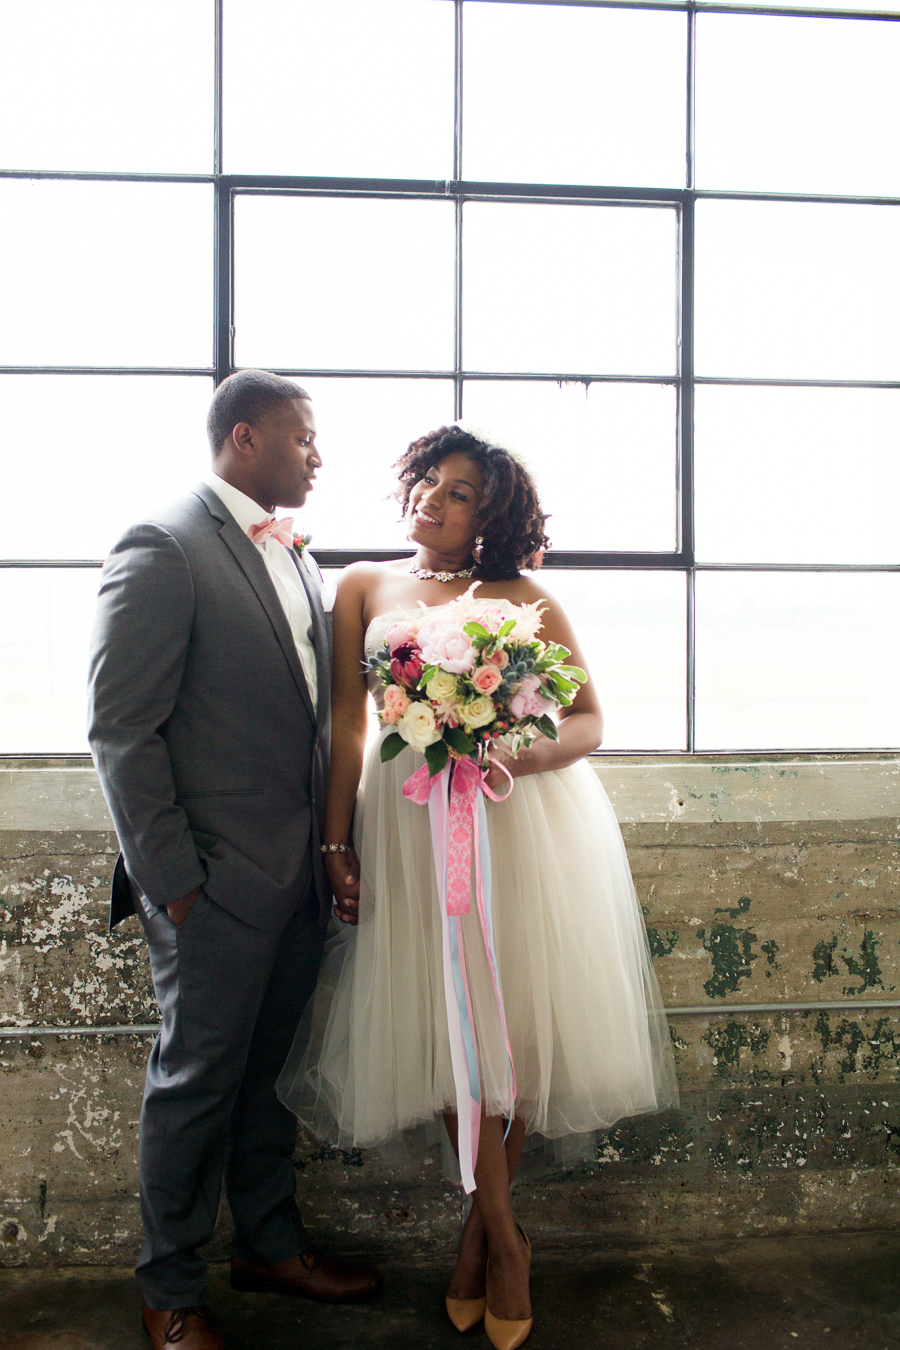 Houston Tuesdays Together (Rising Tide Society) Pantone Colors Styled Shoot, African American Bride & Groom, Colorful Bouquet